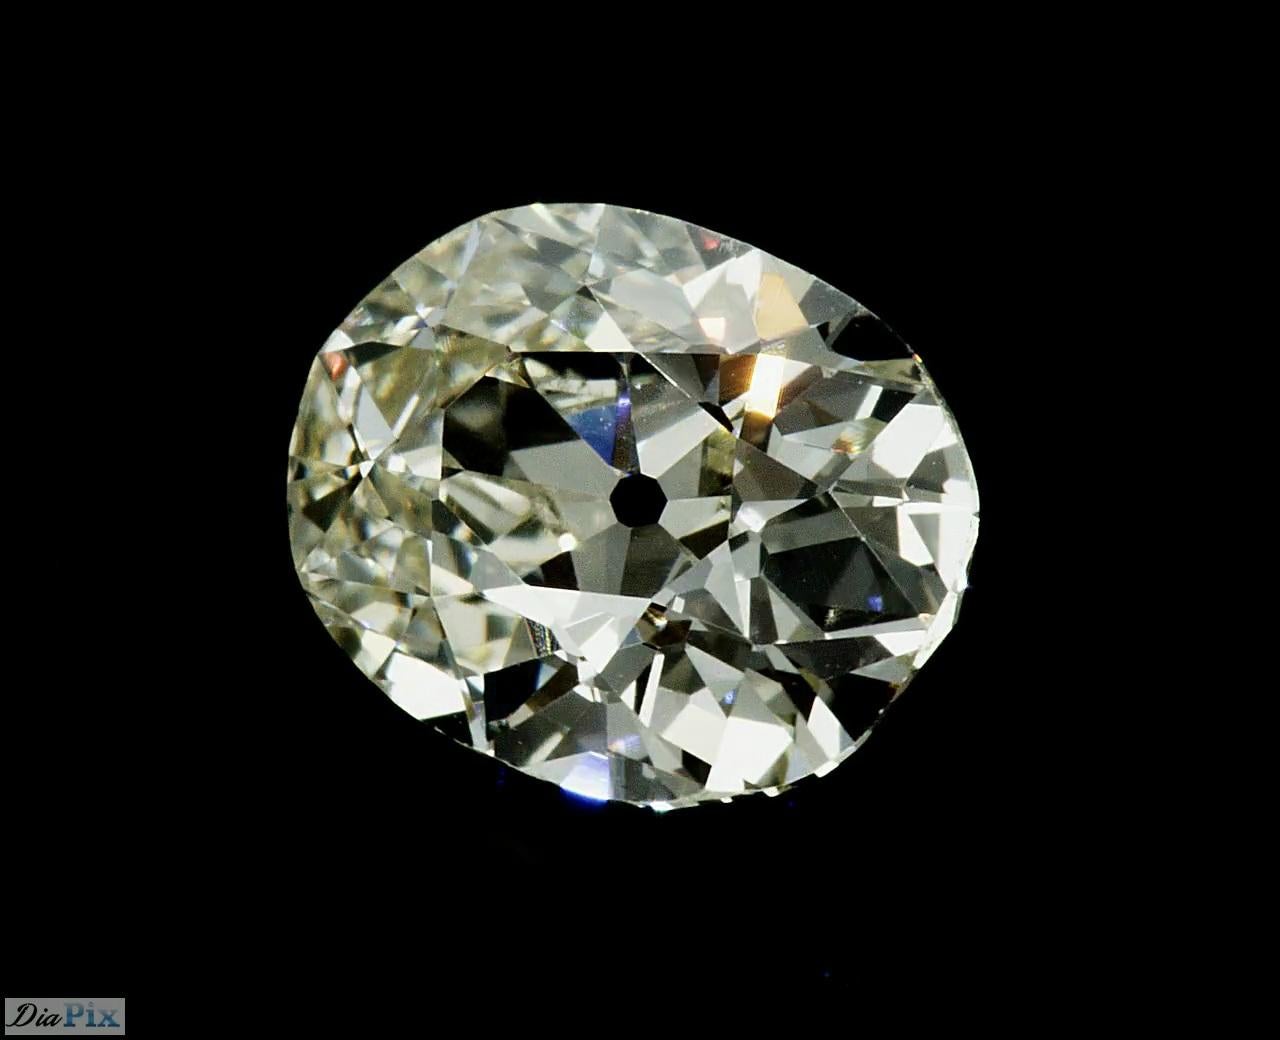 Please revise all the details, photos, videos, and certificate carefully and familiarize yourself with our KYC Policy, below,.

Every diamond we offer has a captivating story to tell and it takes over 200 tons of ore to yield just one carat of